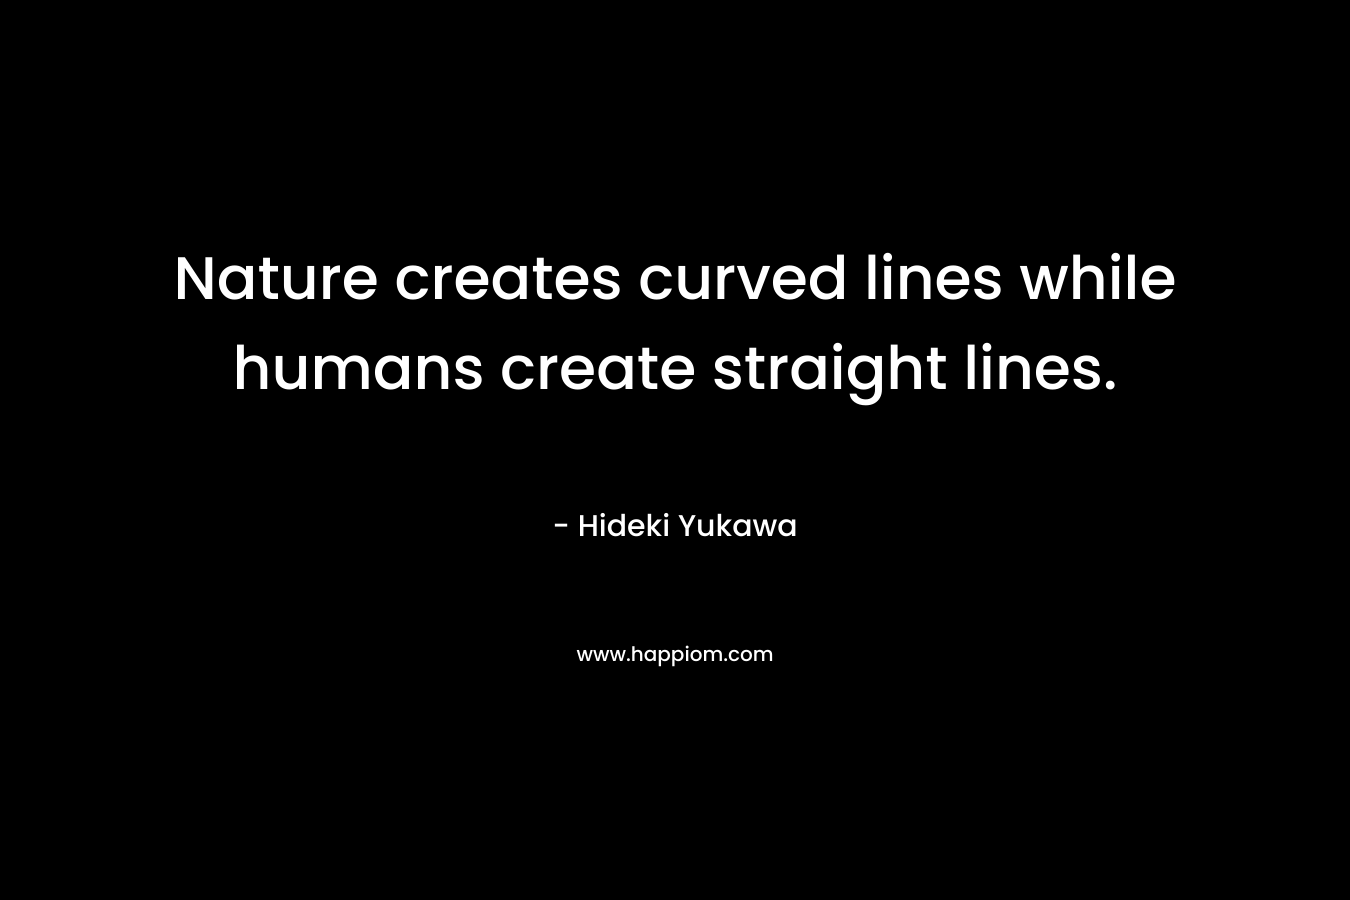 Nature creates curved lines while humans create straight lines.